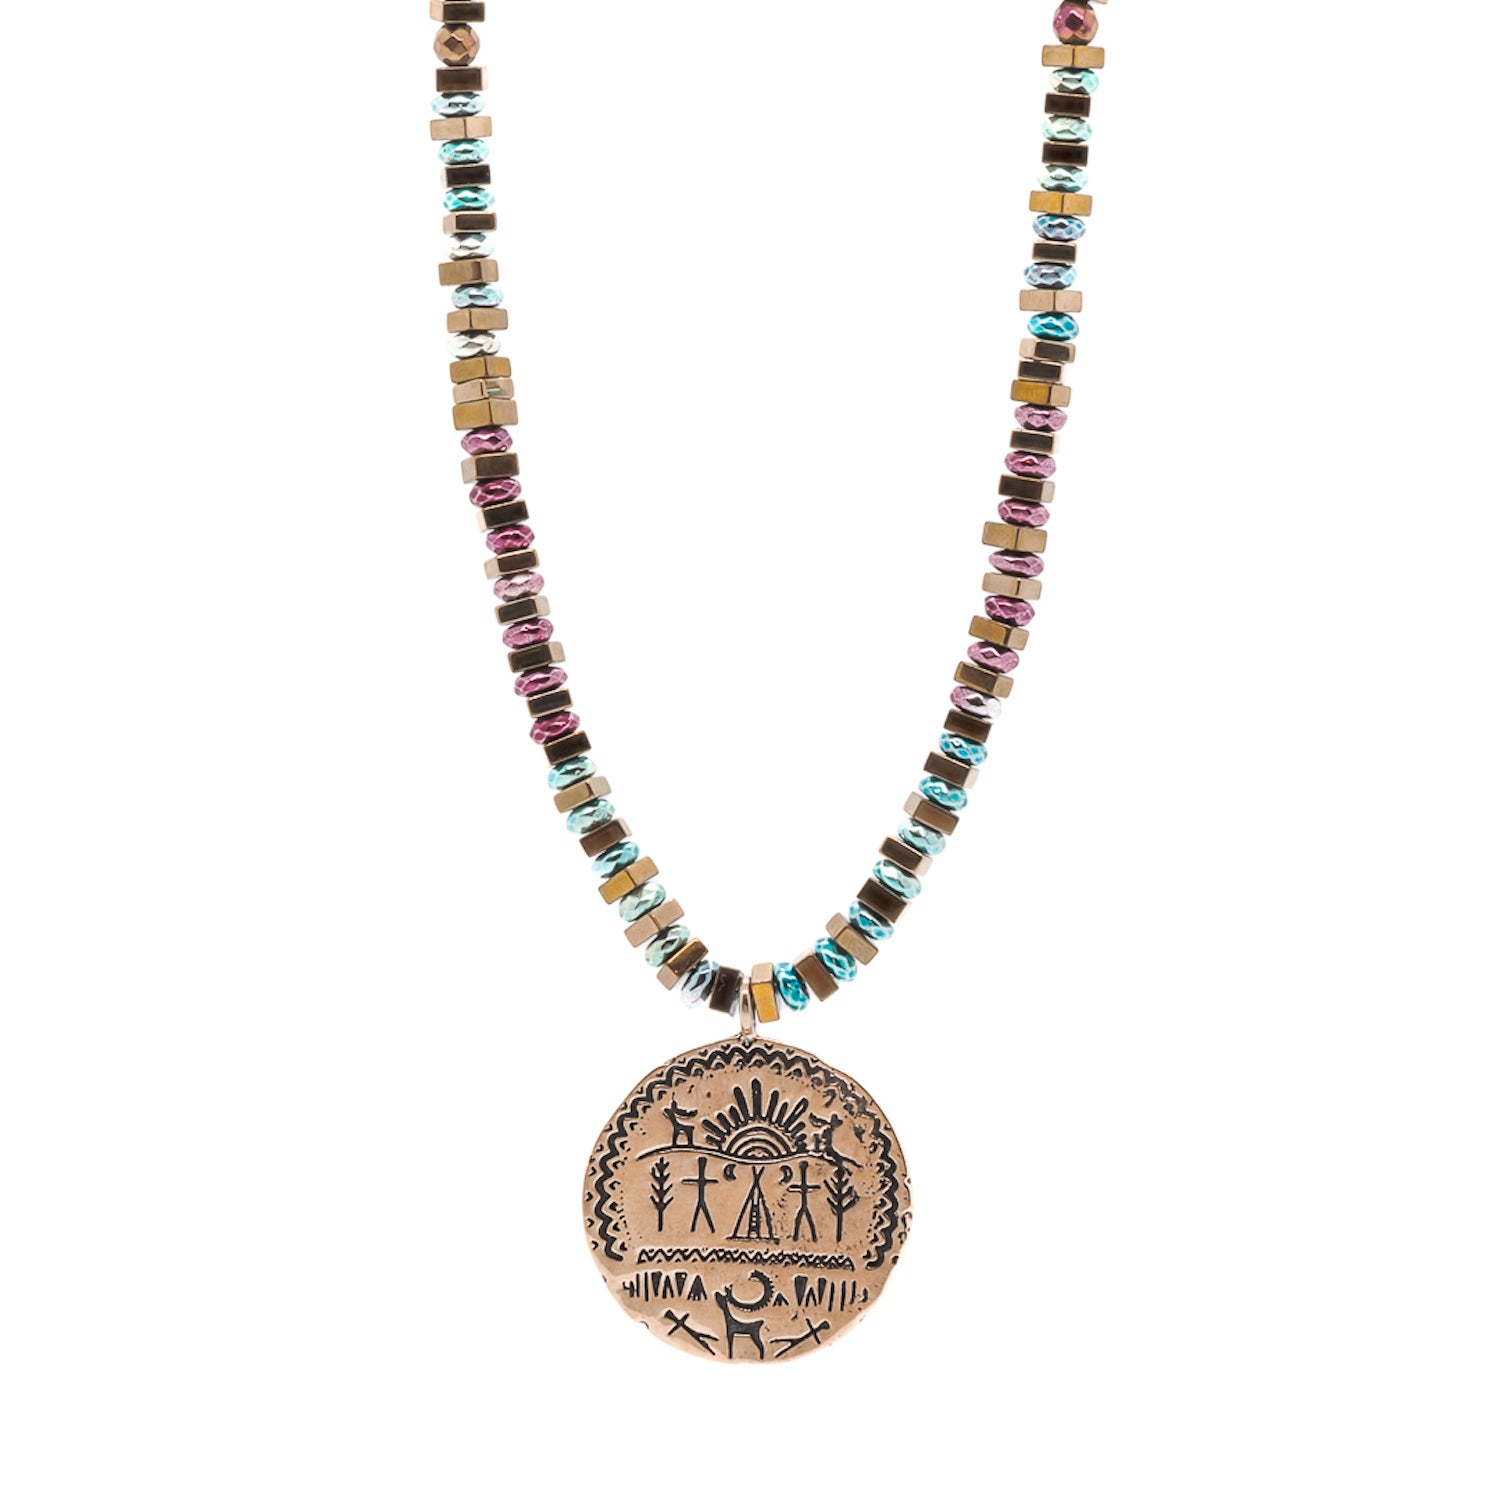 Handmade Shamanic Necklace - Featuring Moroccan Flower Beads and Sacred Symbols.